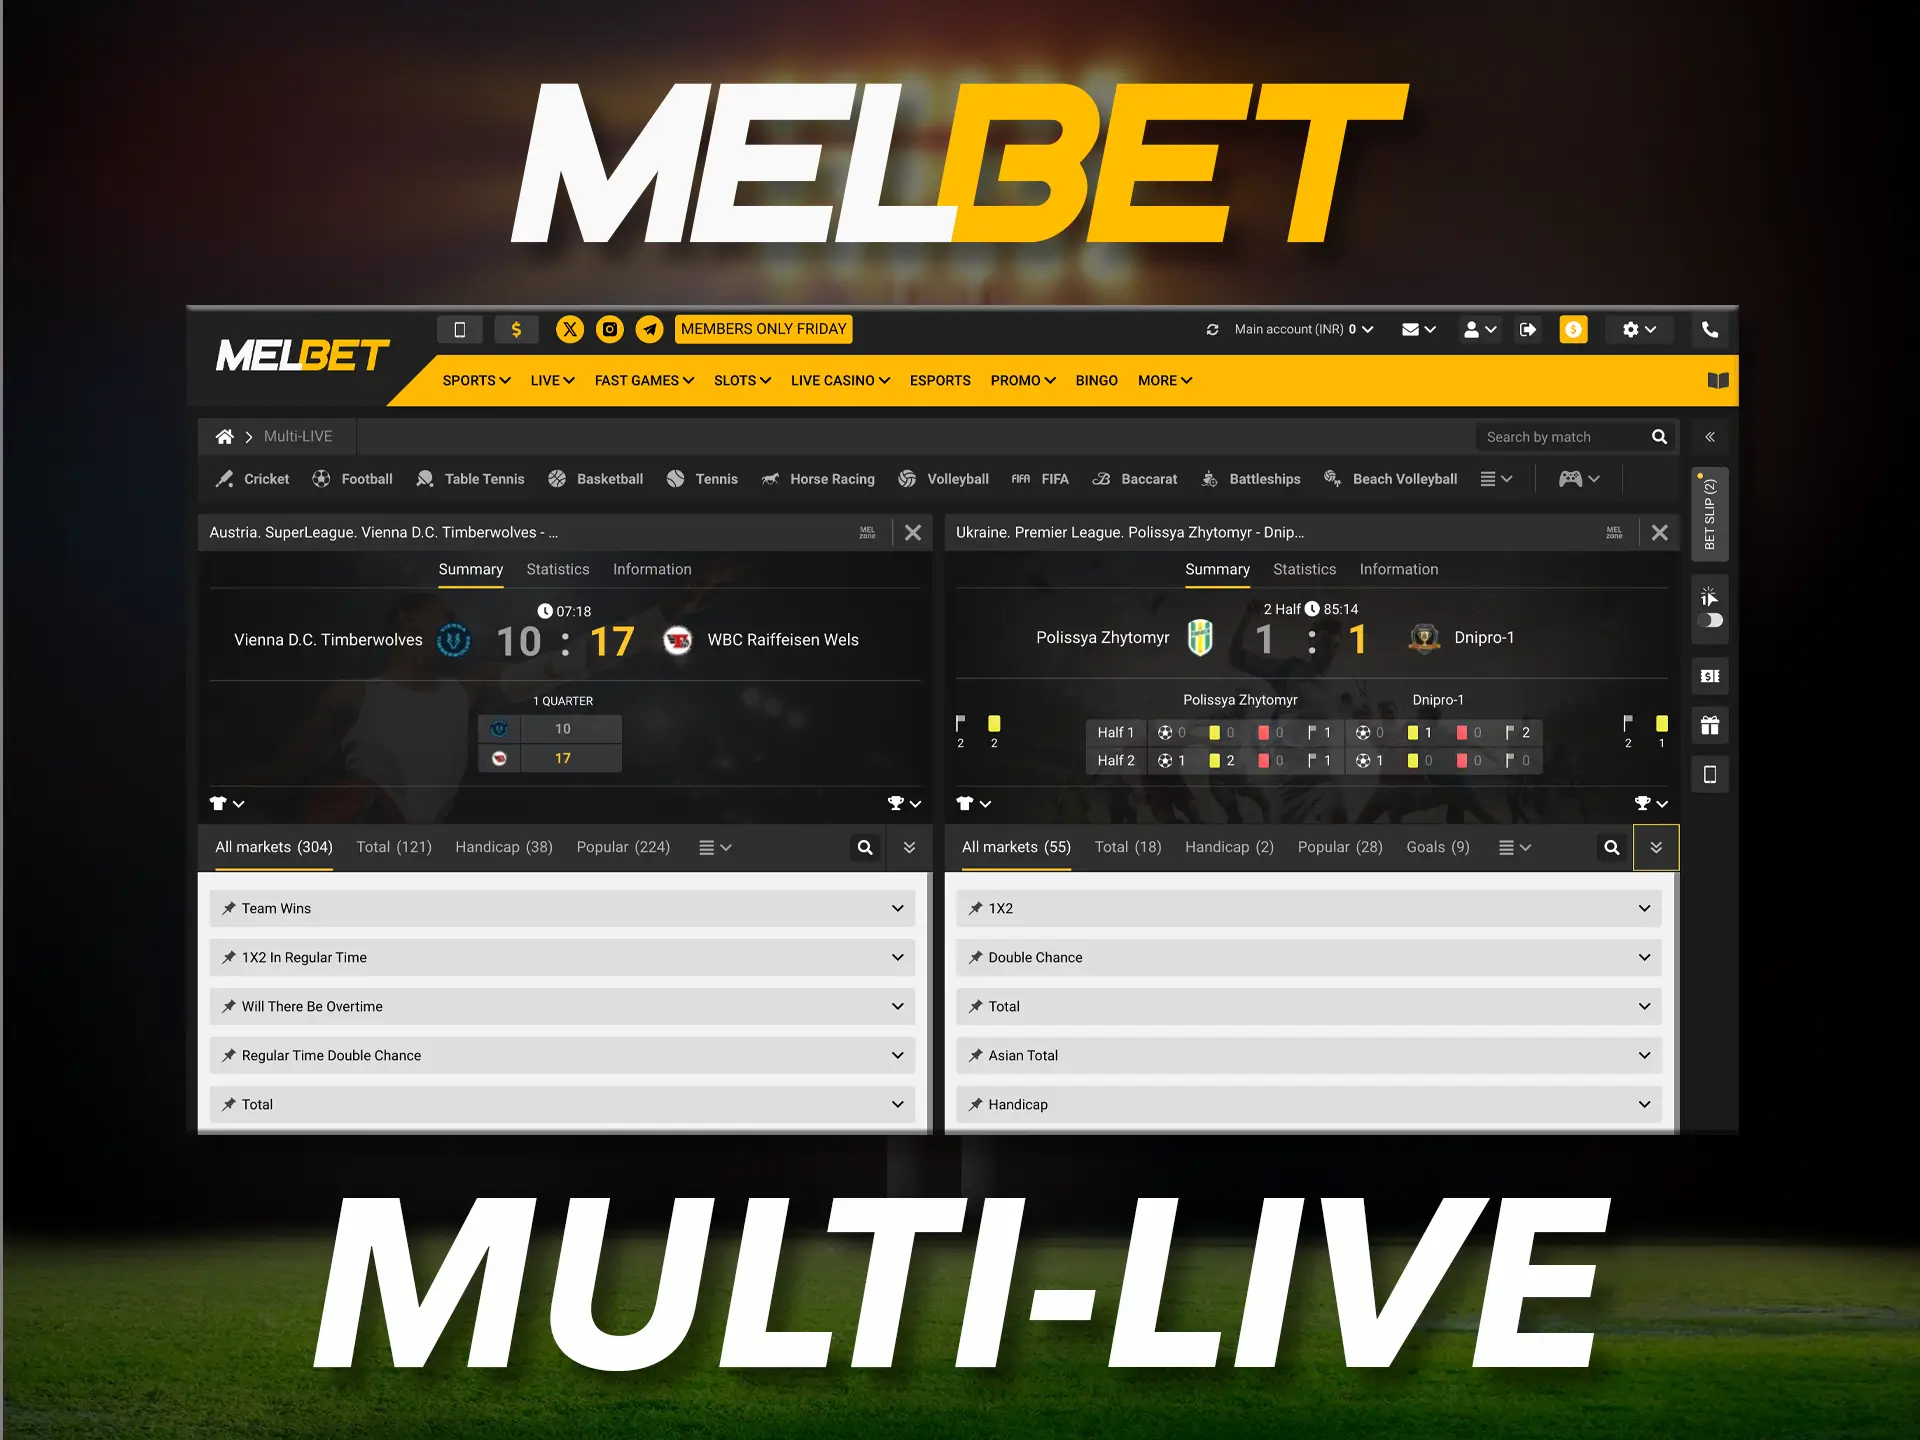 Follow your favourite teams and make the right predictions at Melbet.